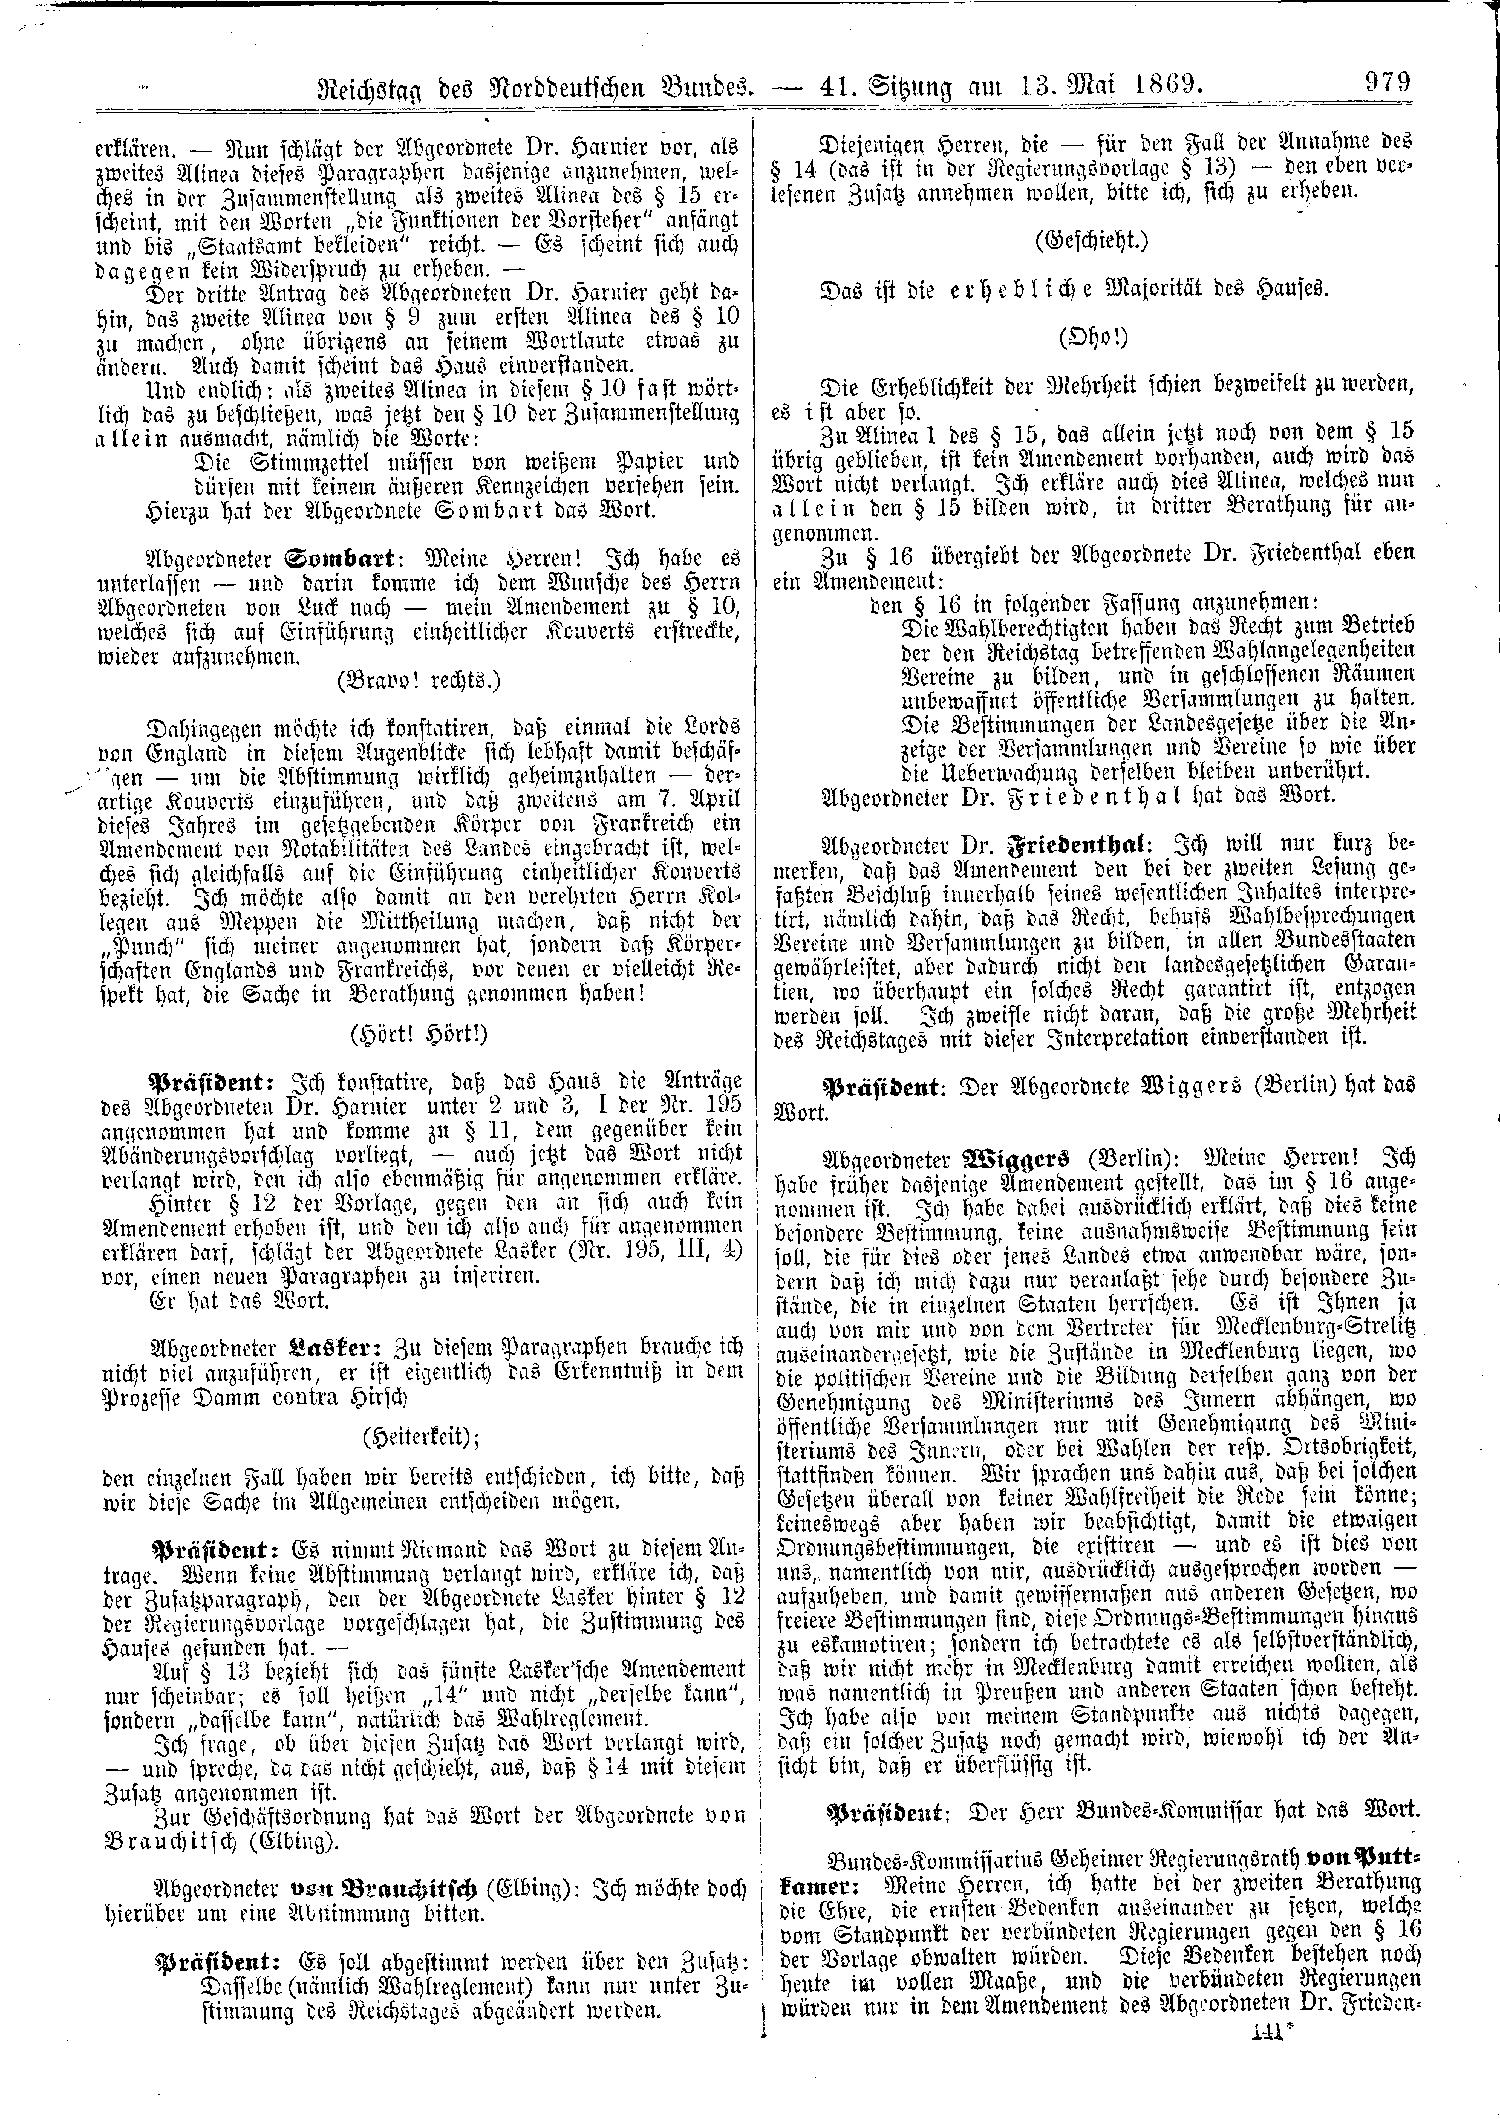 Scan of page 979